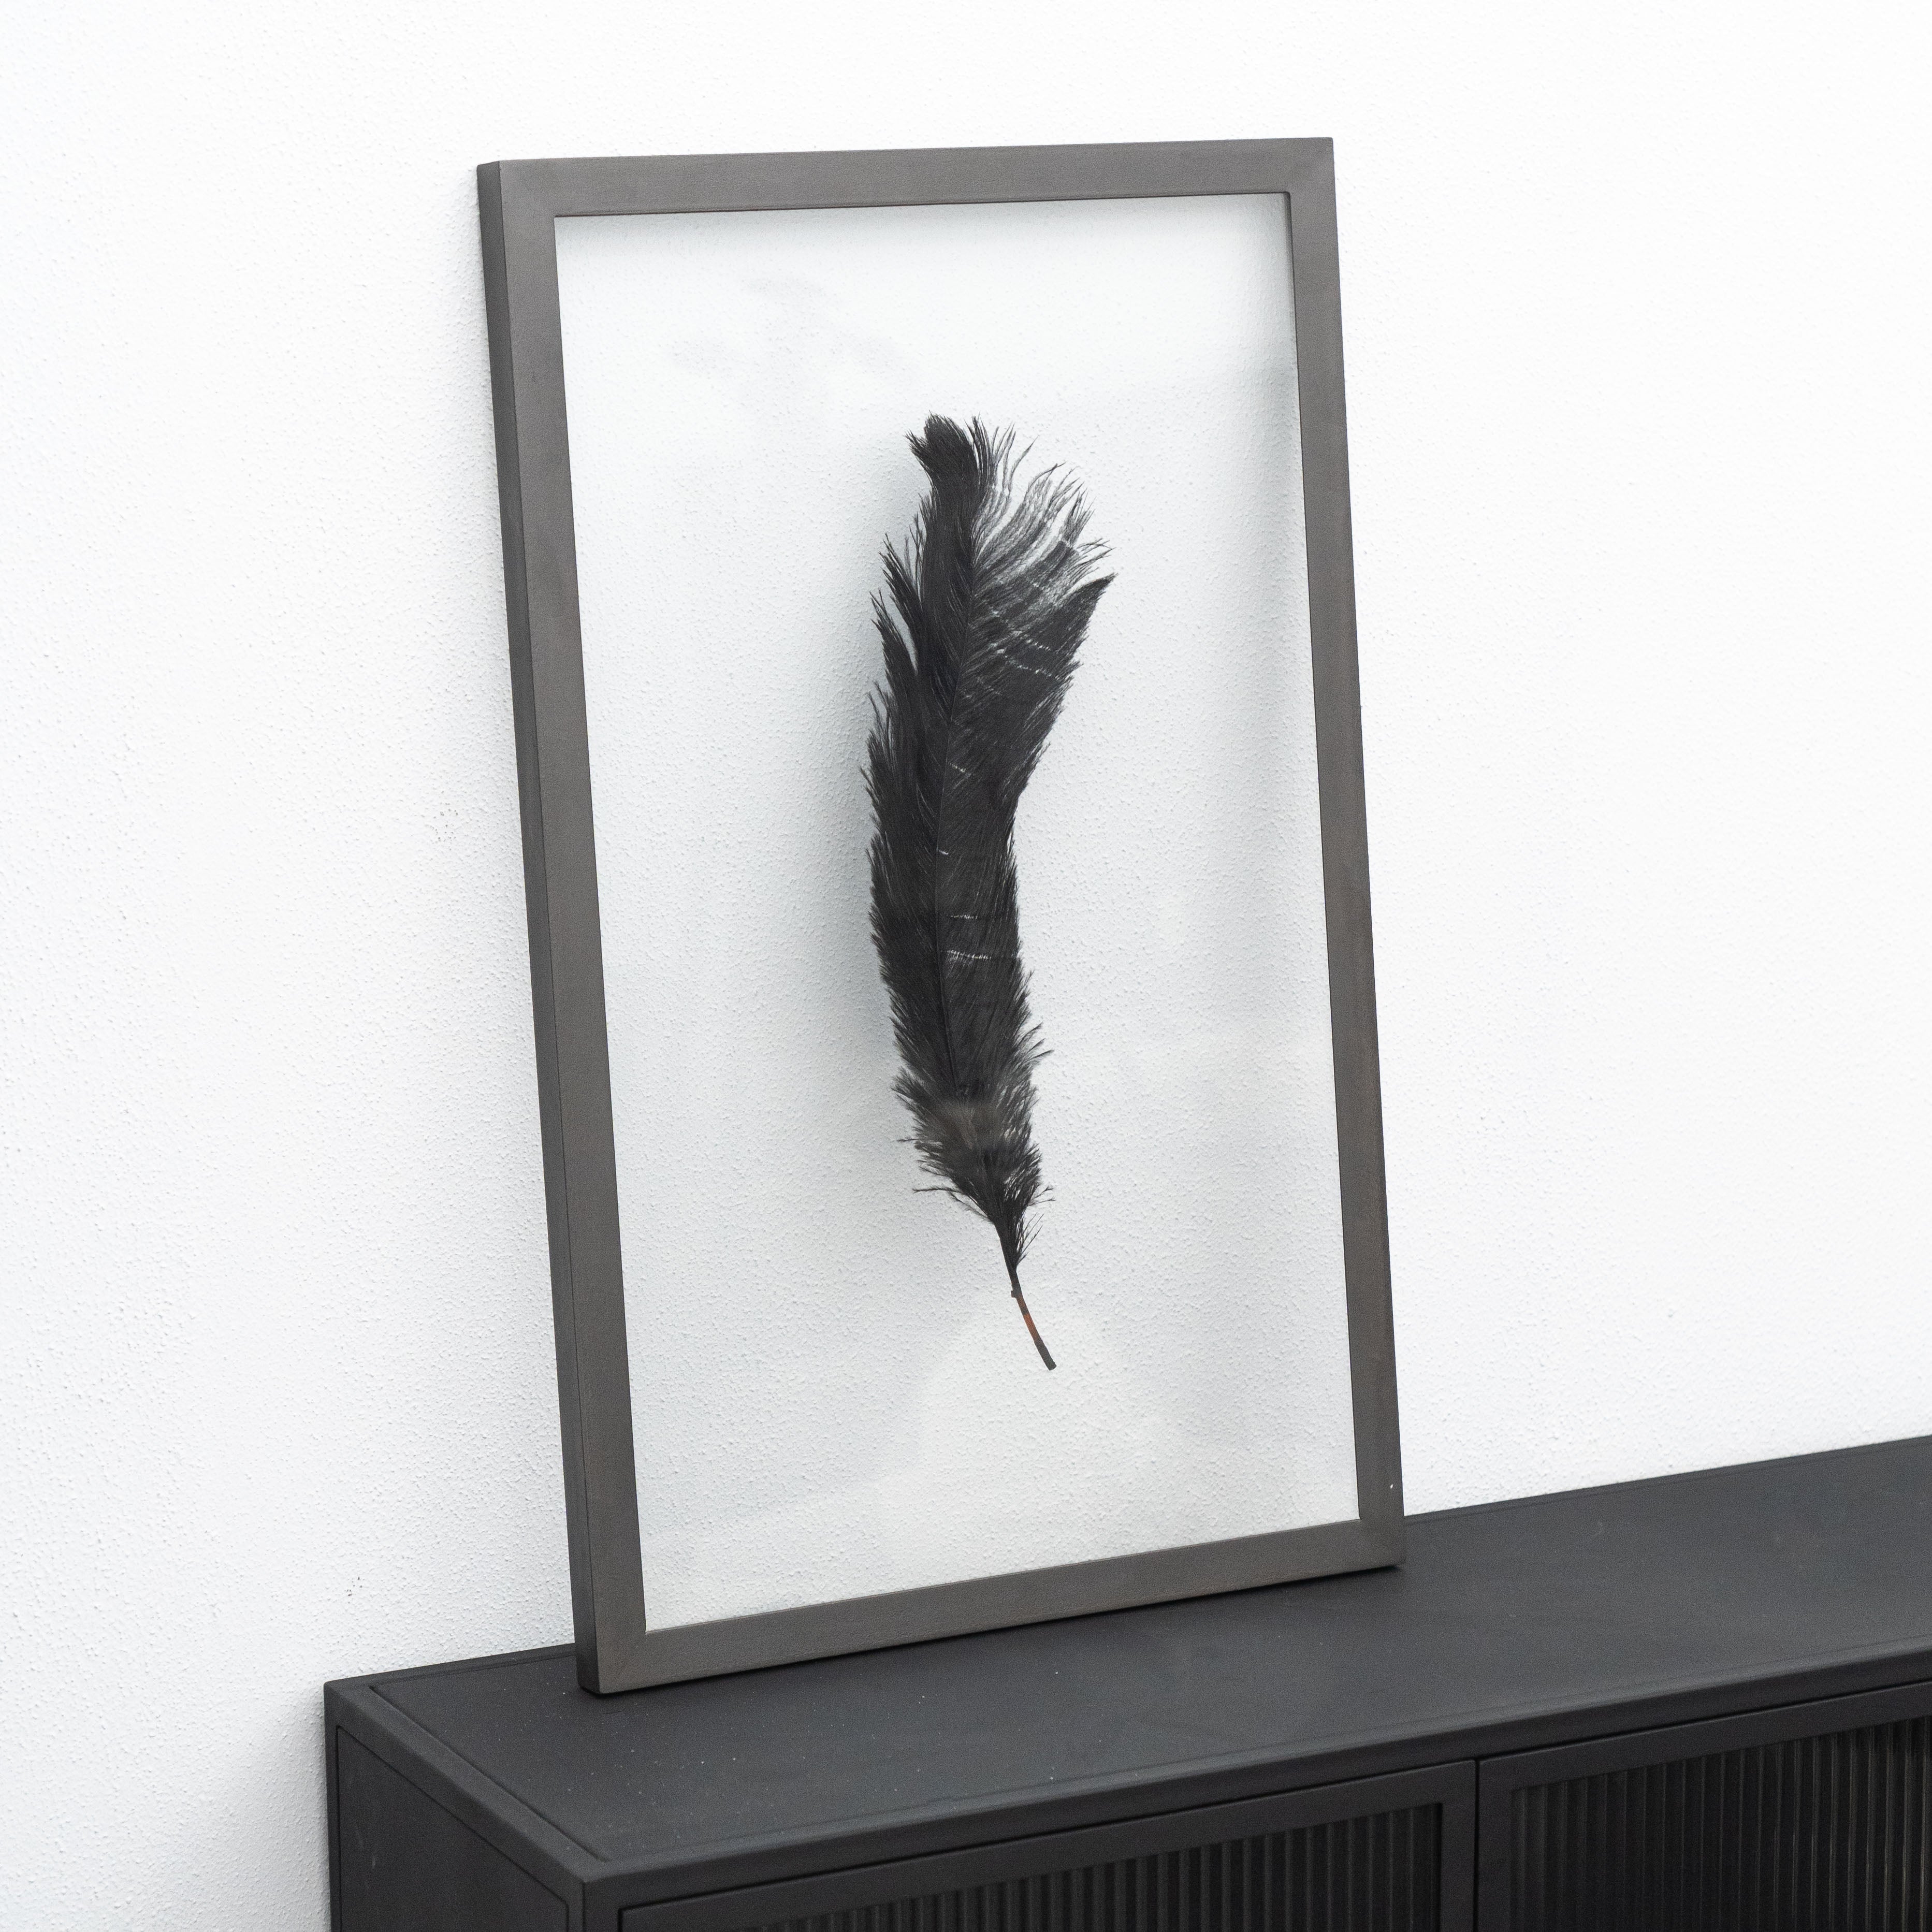 Feather Artwork With Transparent Glass Frame  - WS Living - UAE - Wall Decor / Artwork Wood and steel Furnitures - Dubai